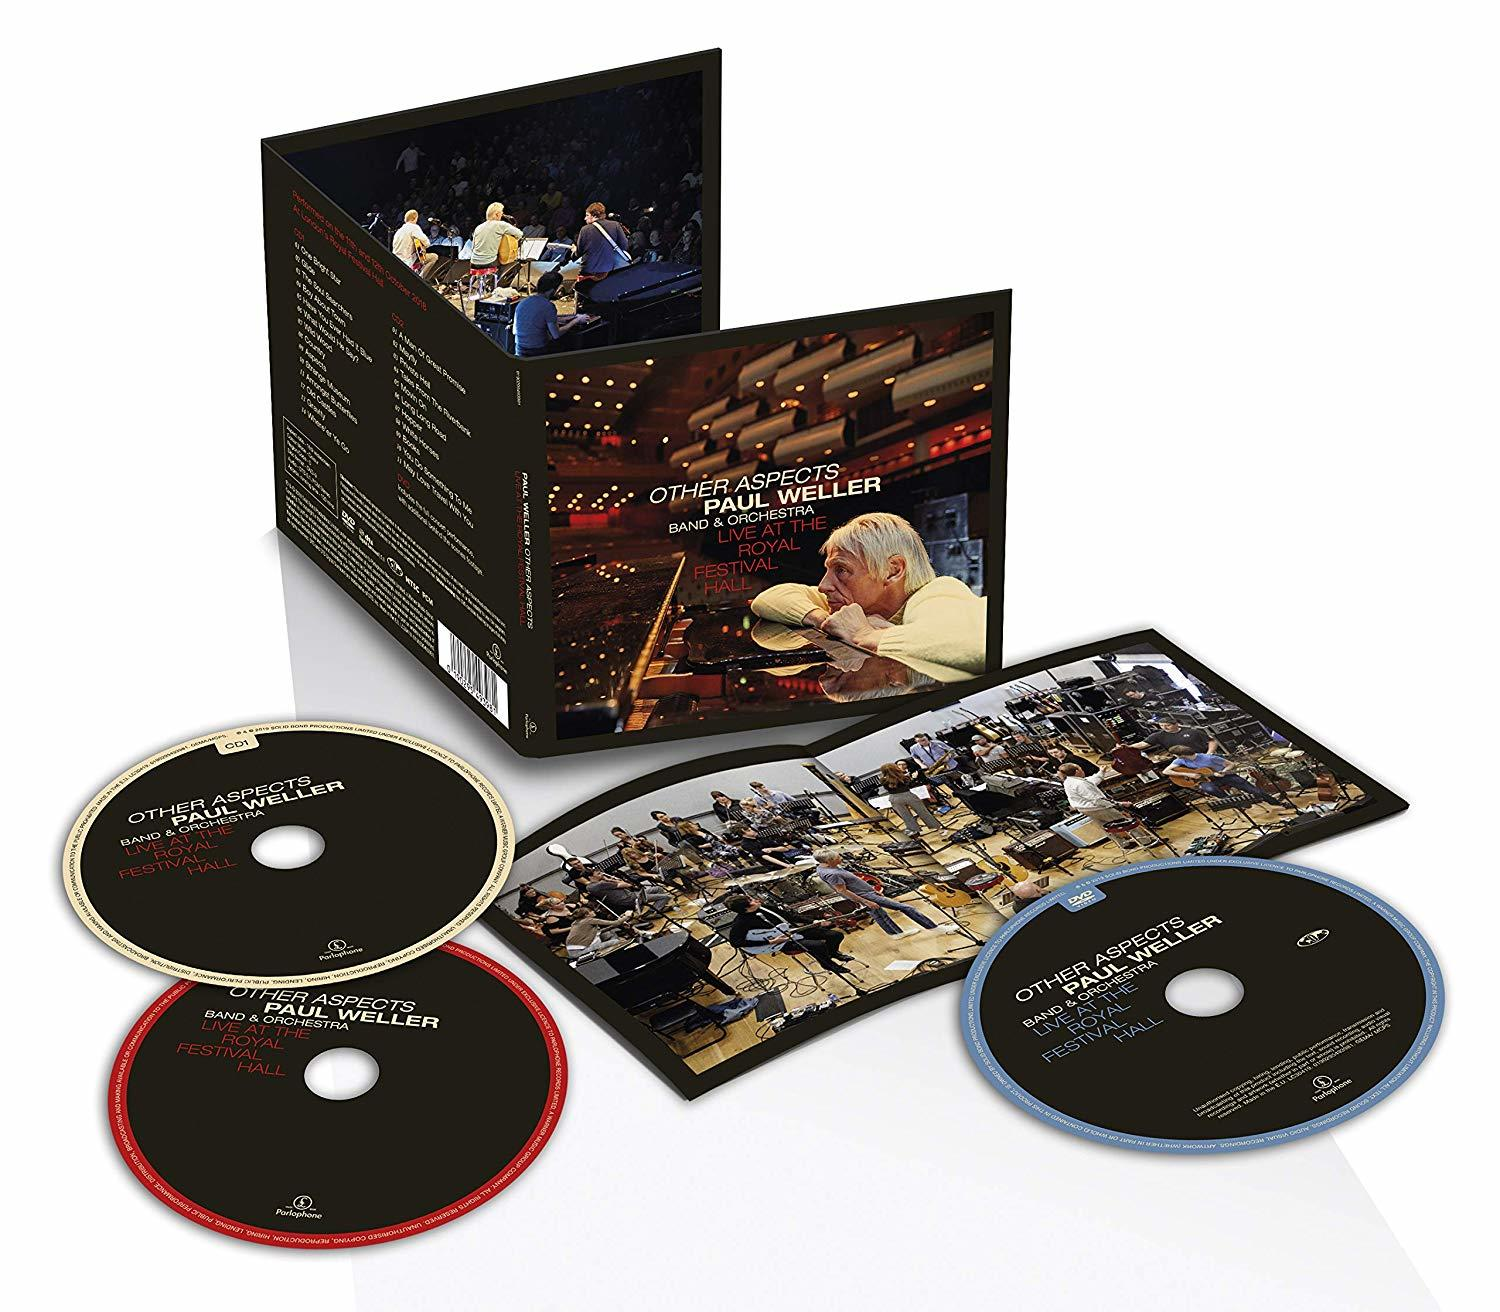 - The Weller - Aspects,Live At Royal DVD Other Paul + (CD Festival Hall Video)